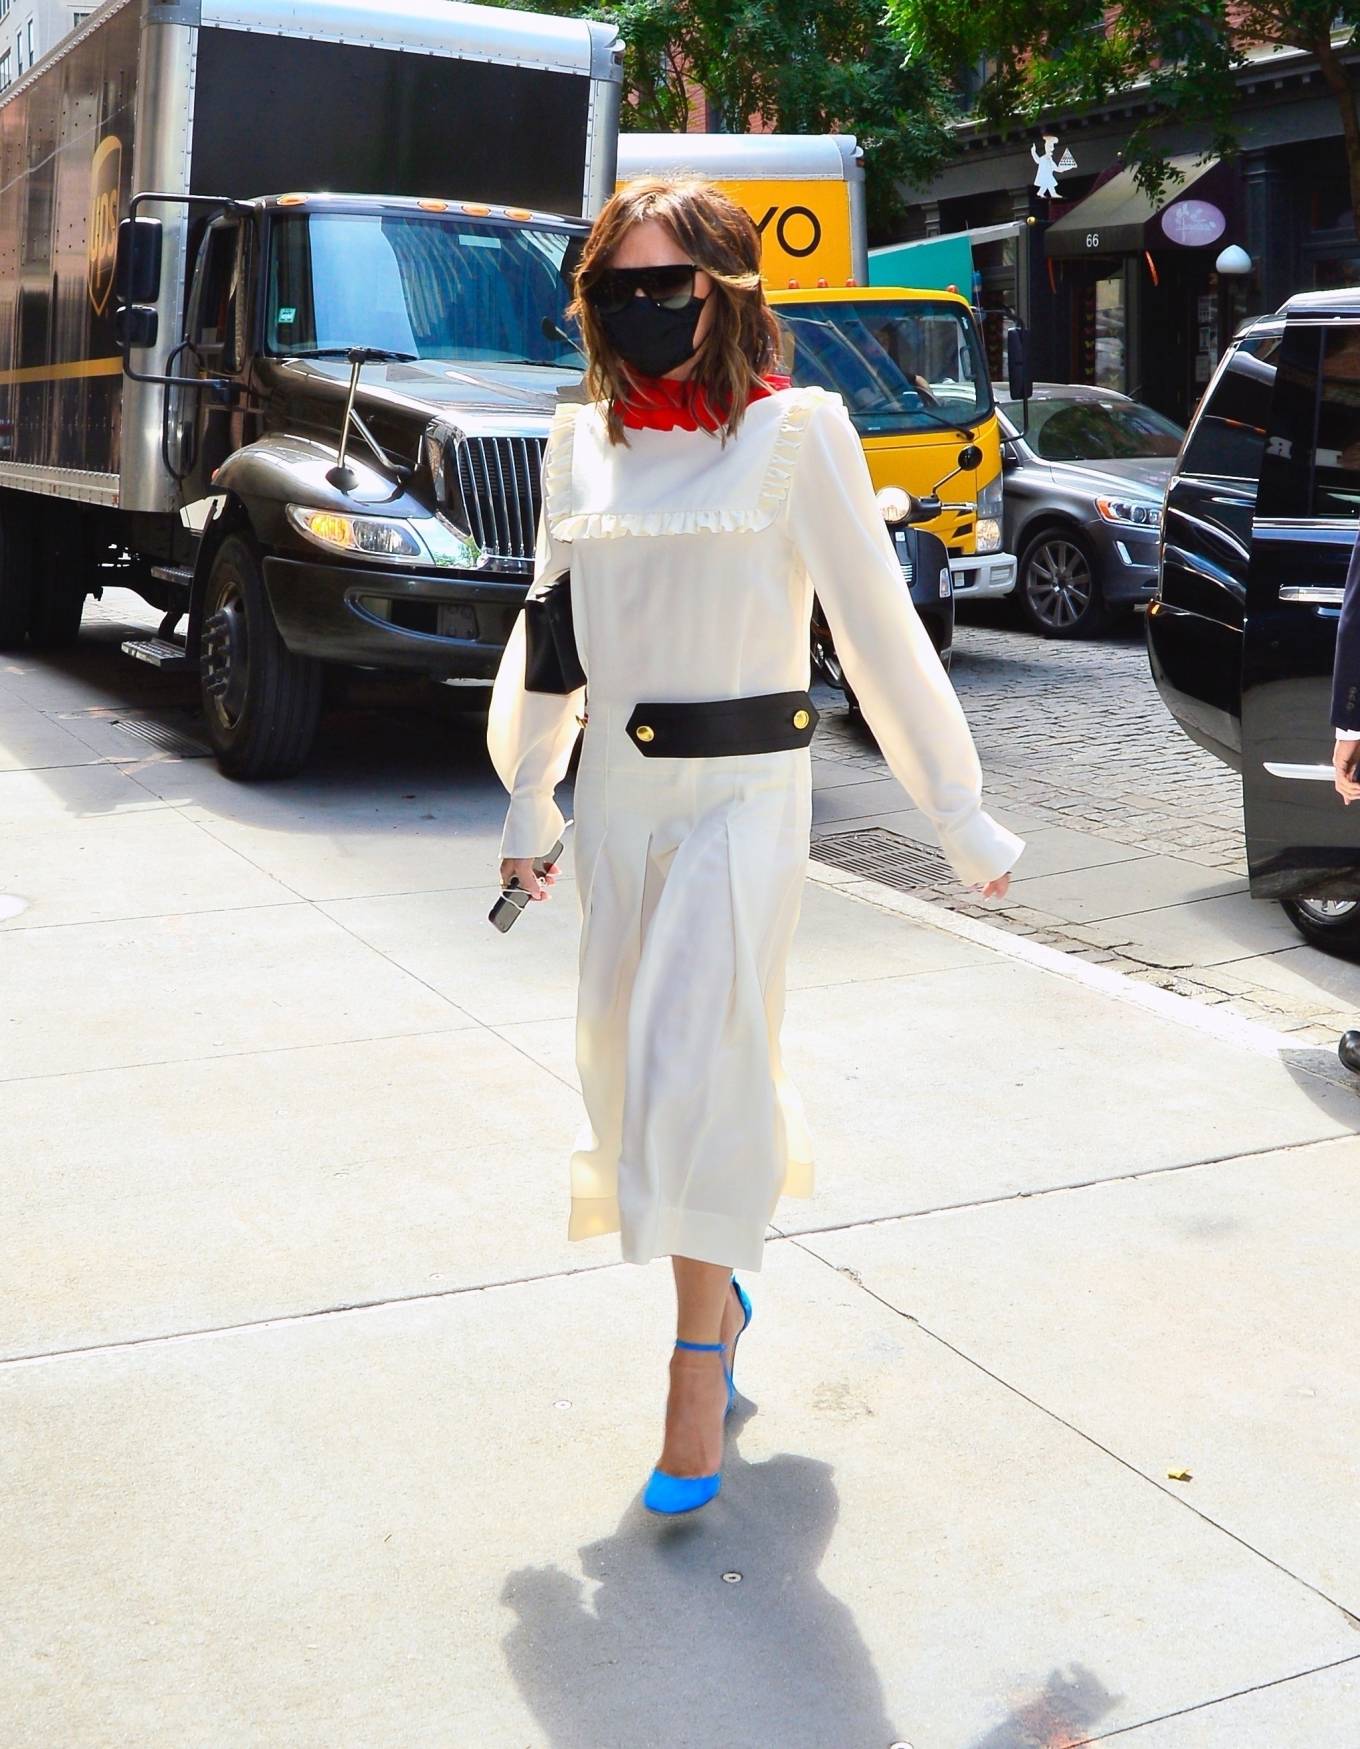 Victoria Beckham 2021 : Victoria Beckham – In white maxi dress steps out in New York-08